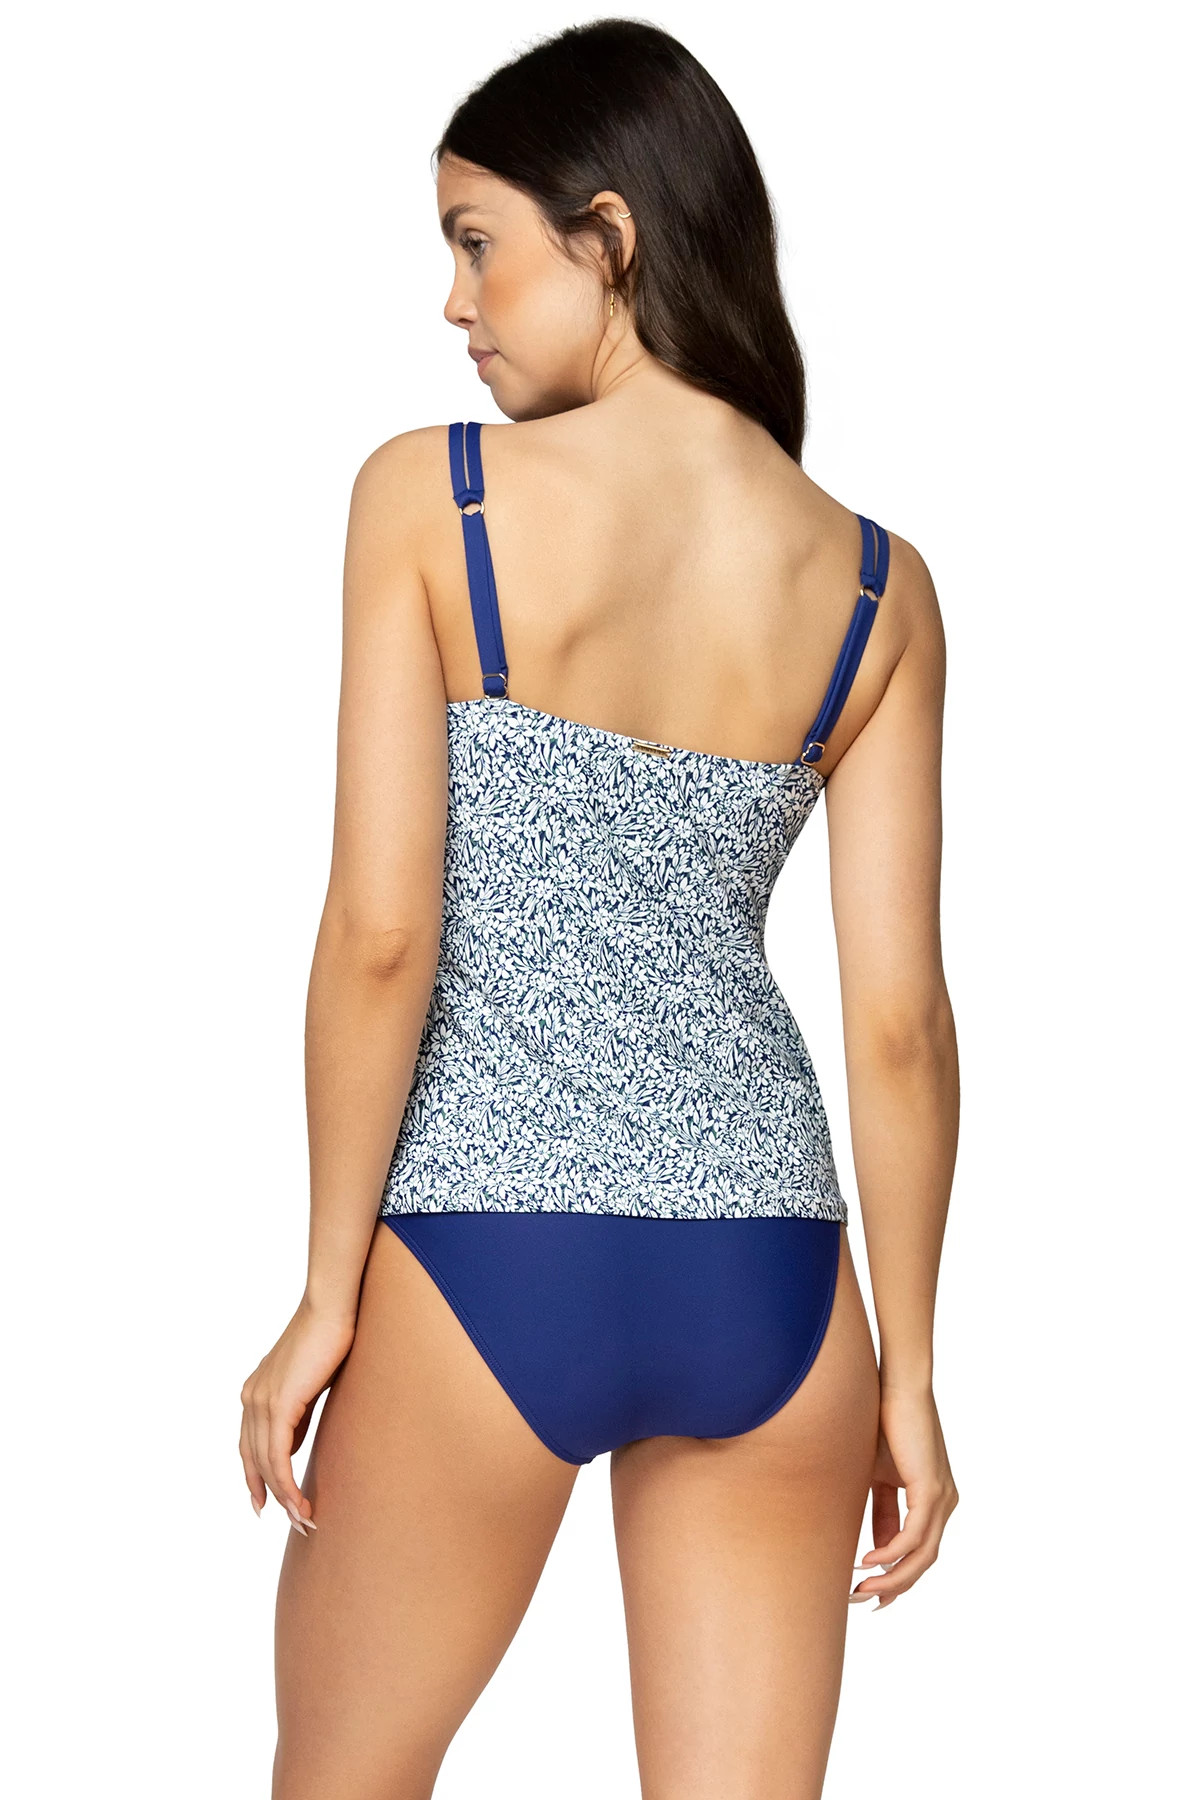 FORGET ME NOT Taylor Underwire Bra Tankini Top (E-H Cup) image number 2